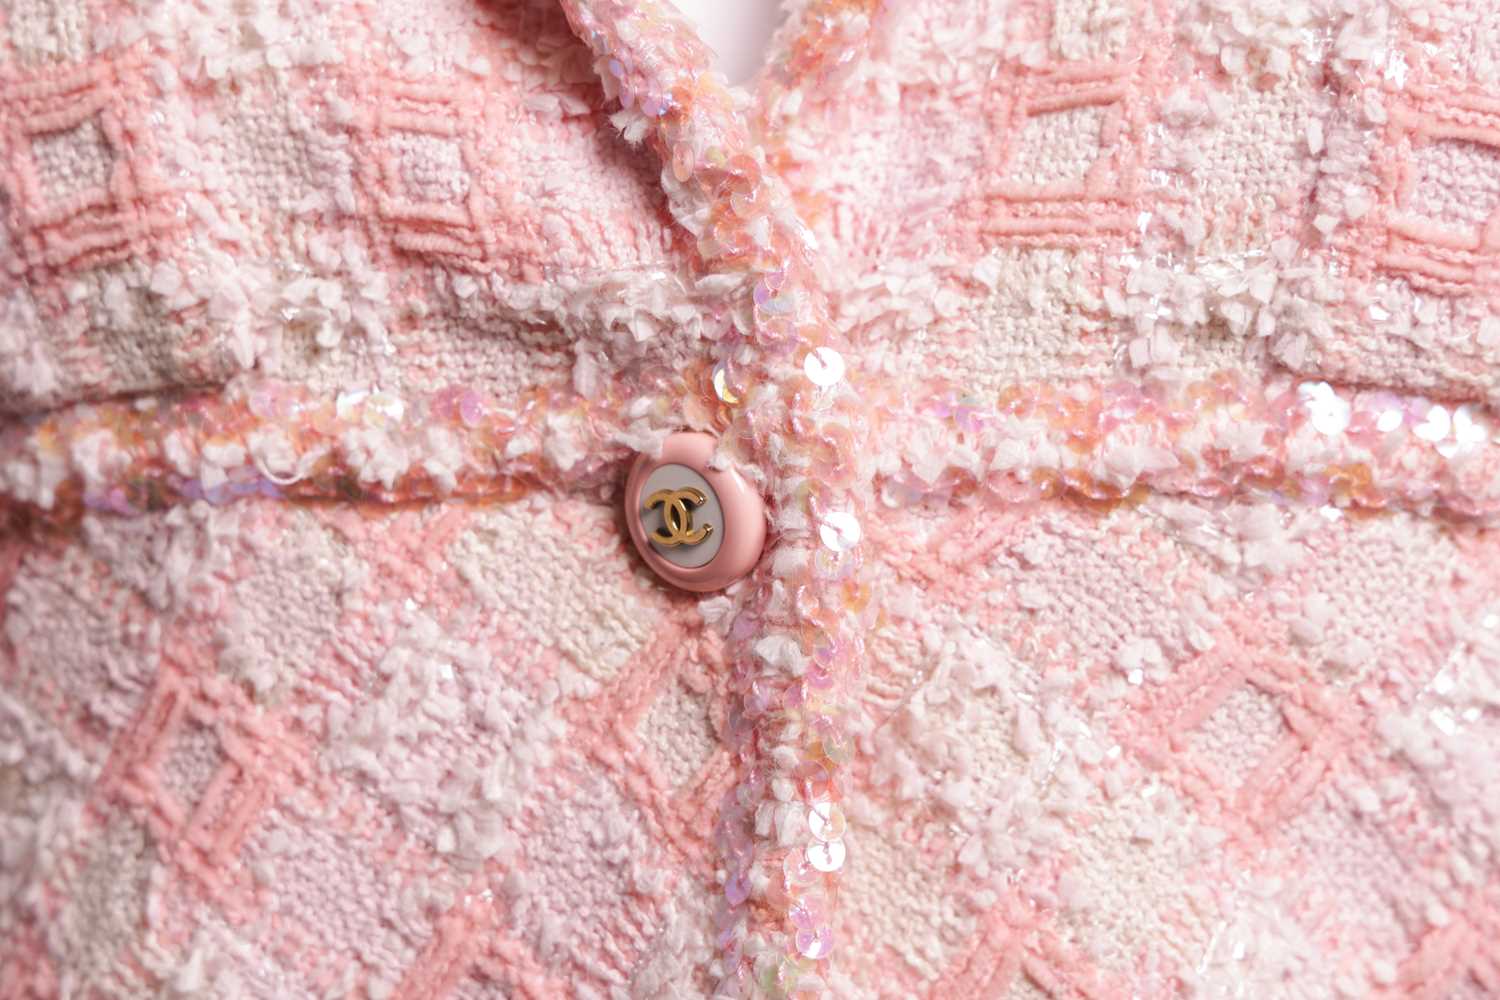 Chanel - a two-piece suit in peachy-pink tweed, from 1995 Spring and Summer ready-to-wear collection - Image 8 of 20